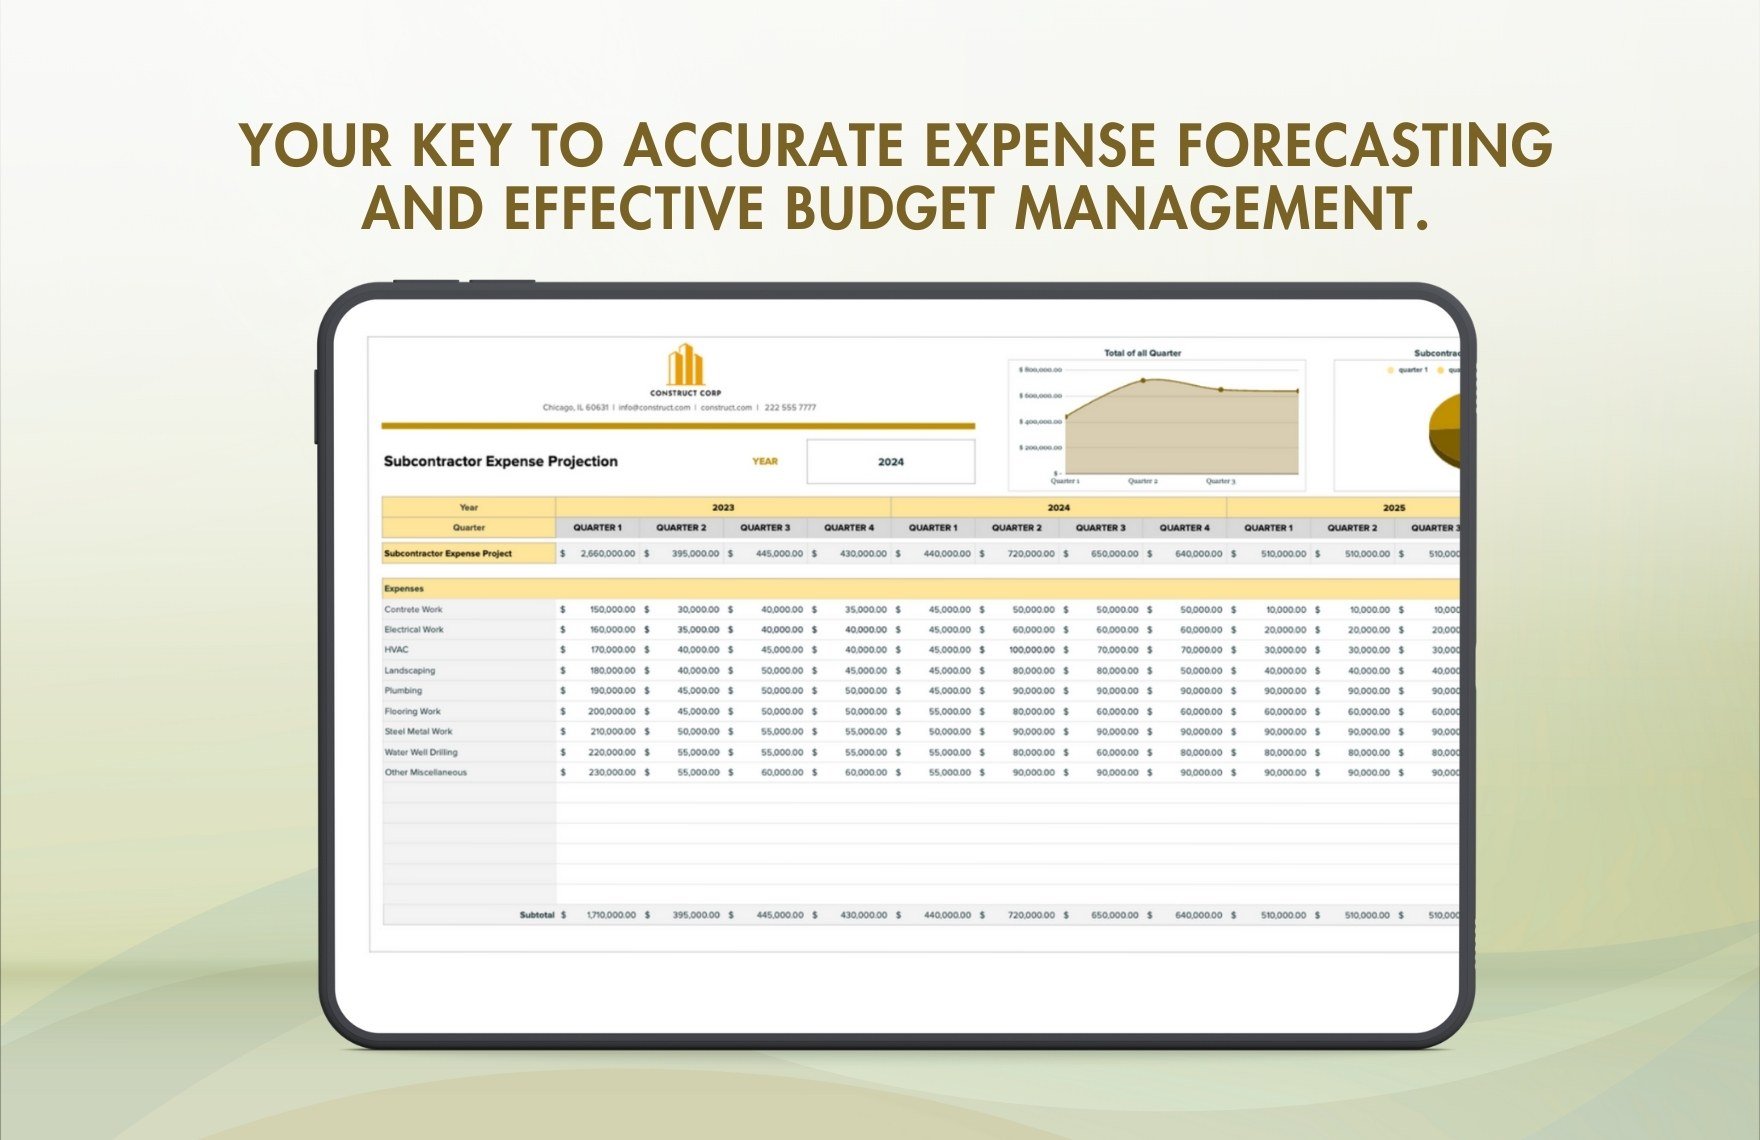 Subcontractor Expense Projection Template